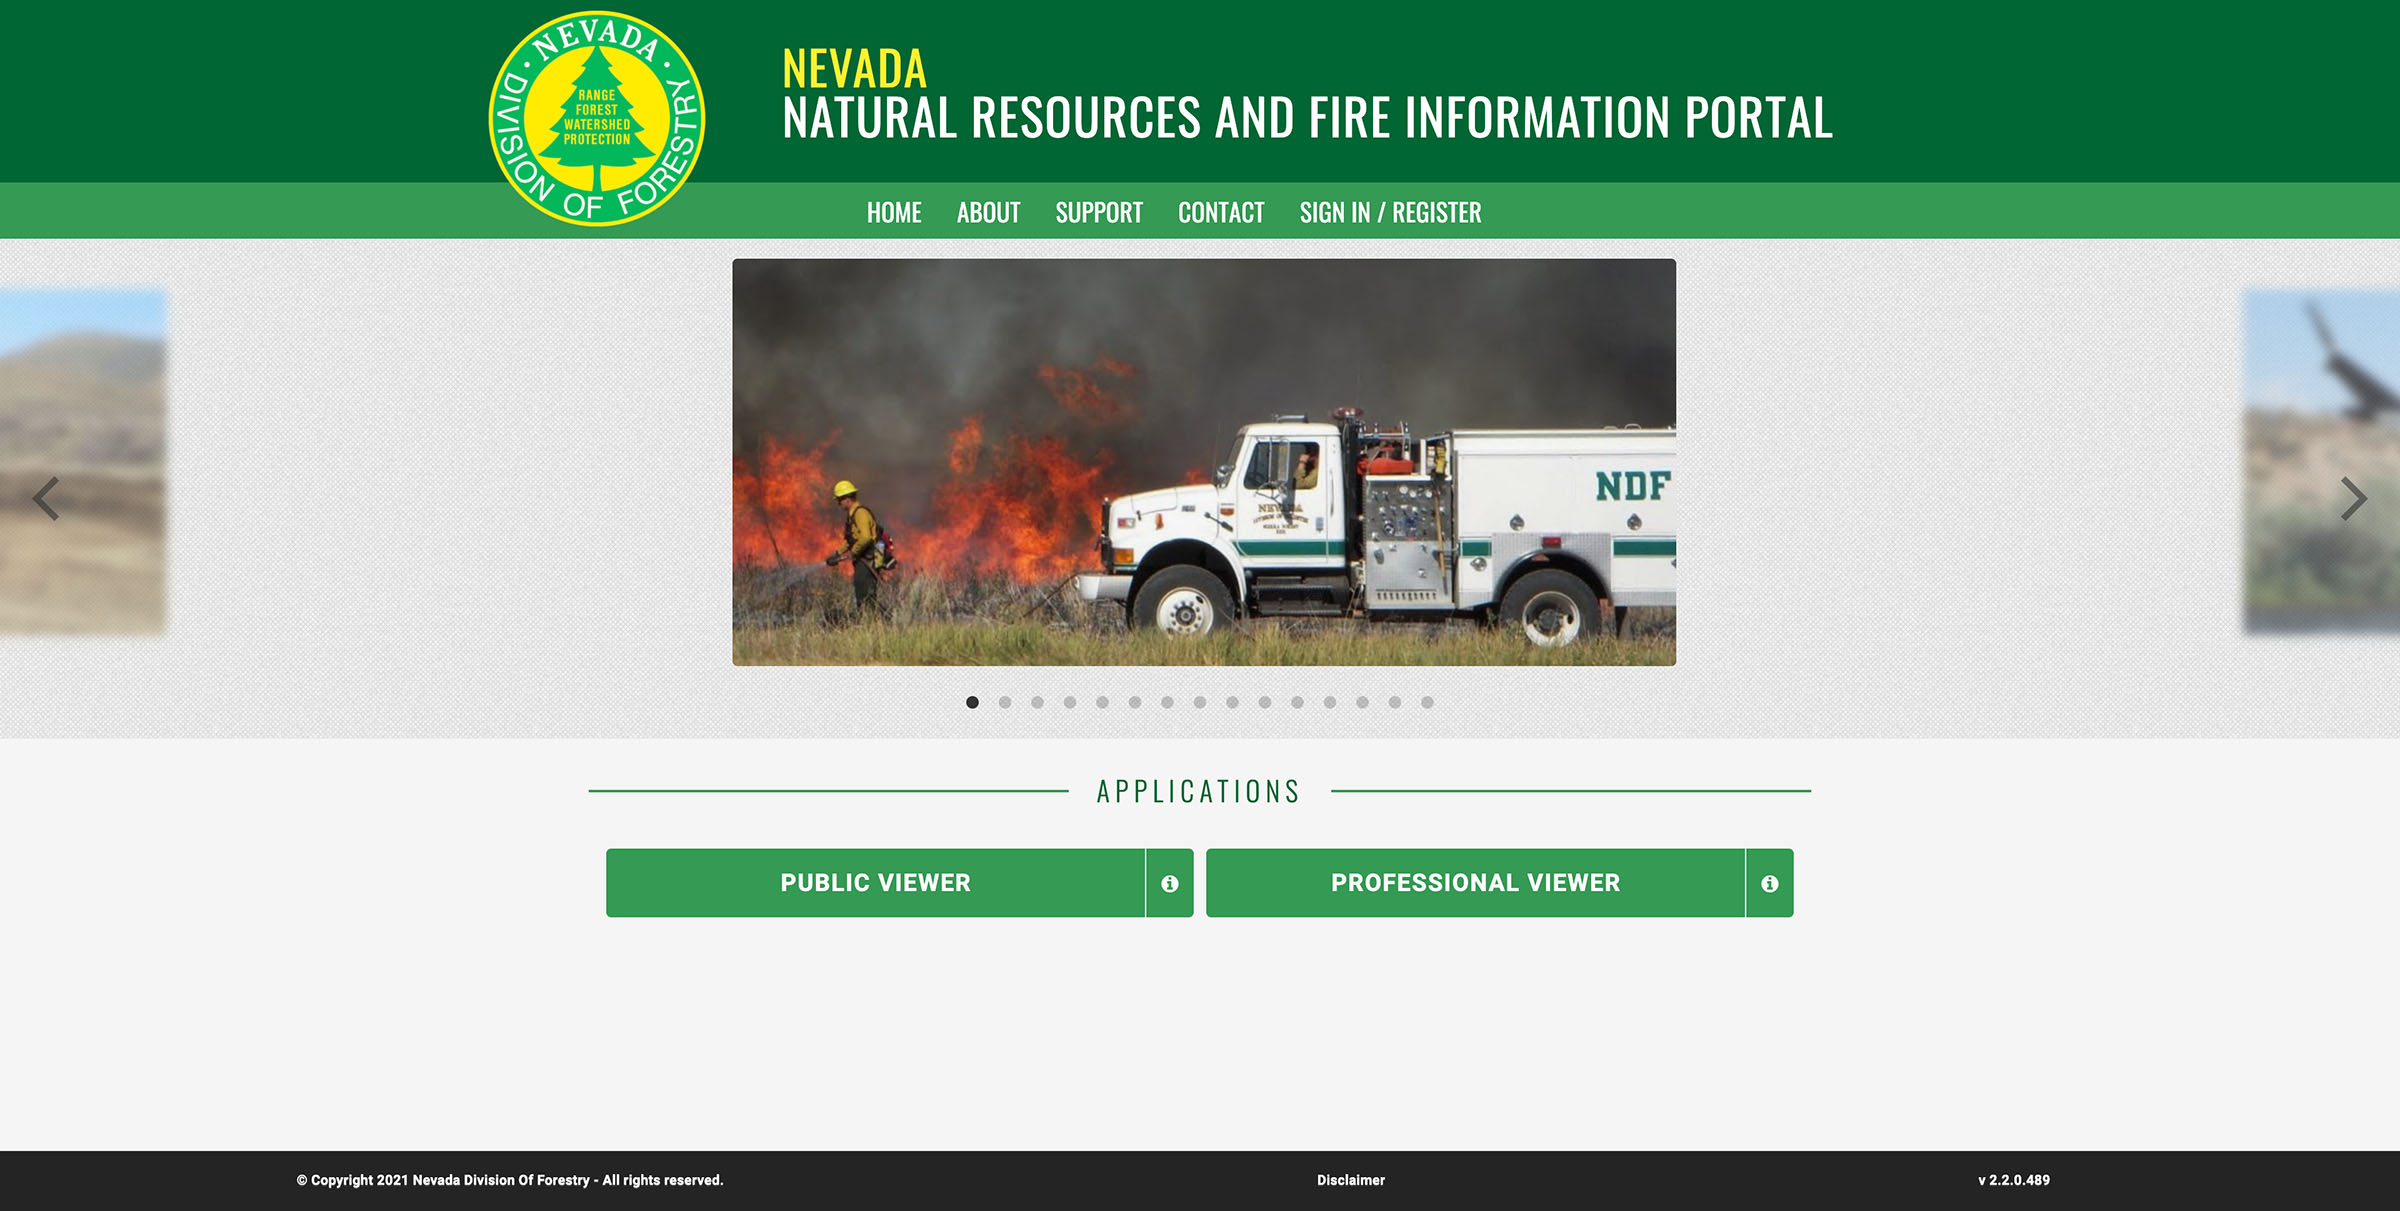 Screenshot showing the Nevada Resources and Fire Information Portal homepage.